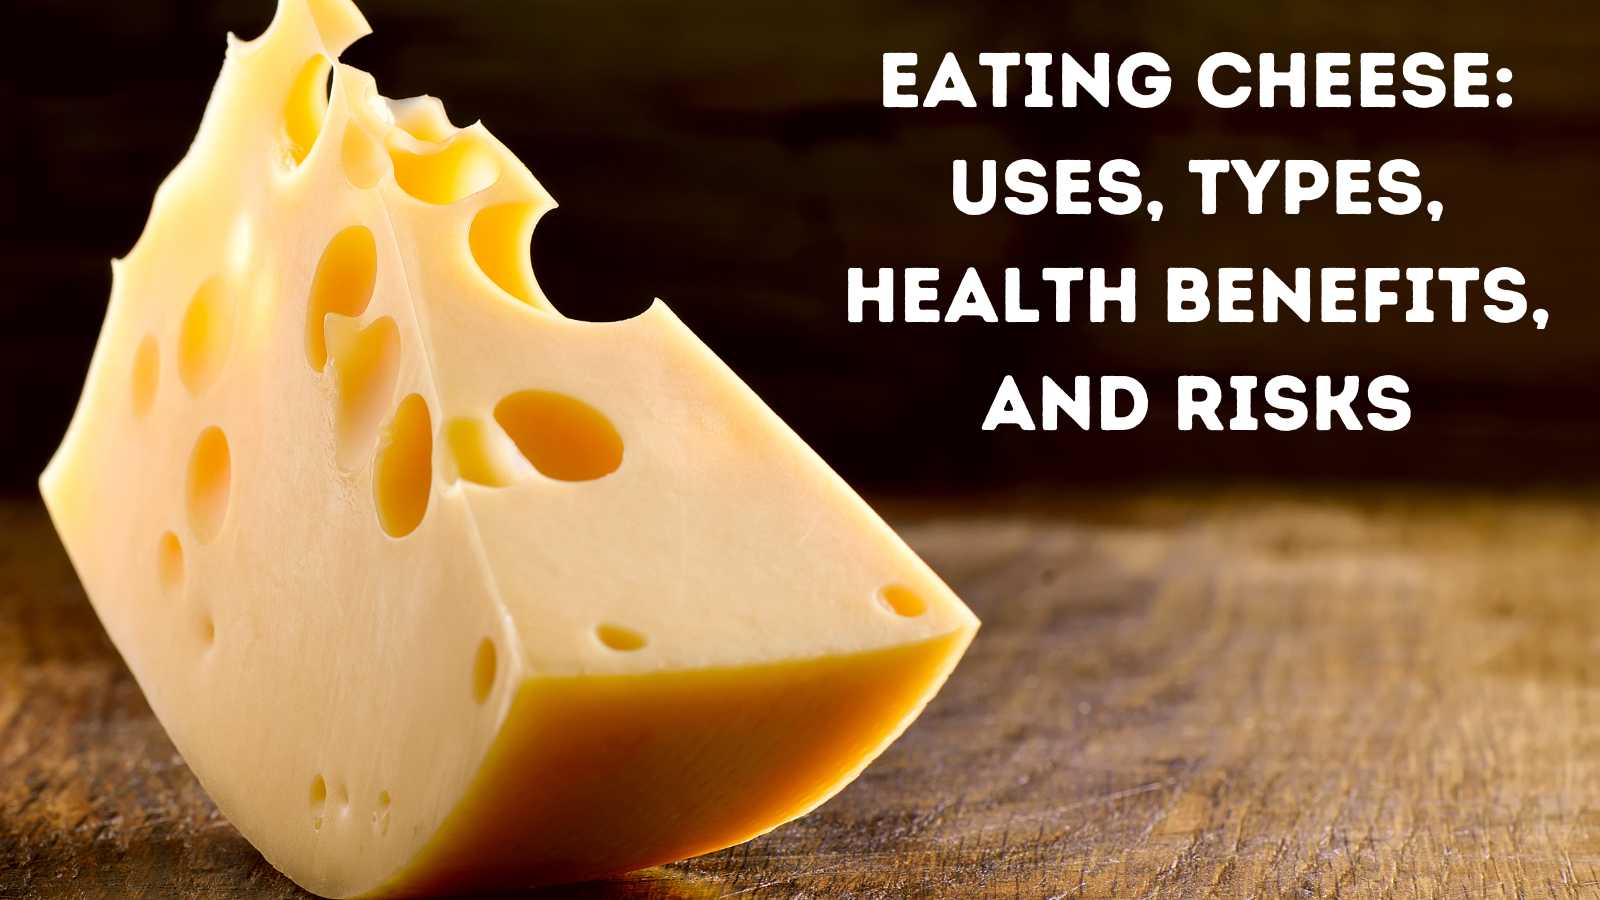 Eating Cheese Uses, Types, Health Benefits, and Risks